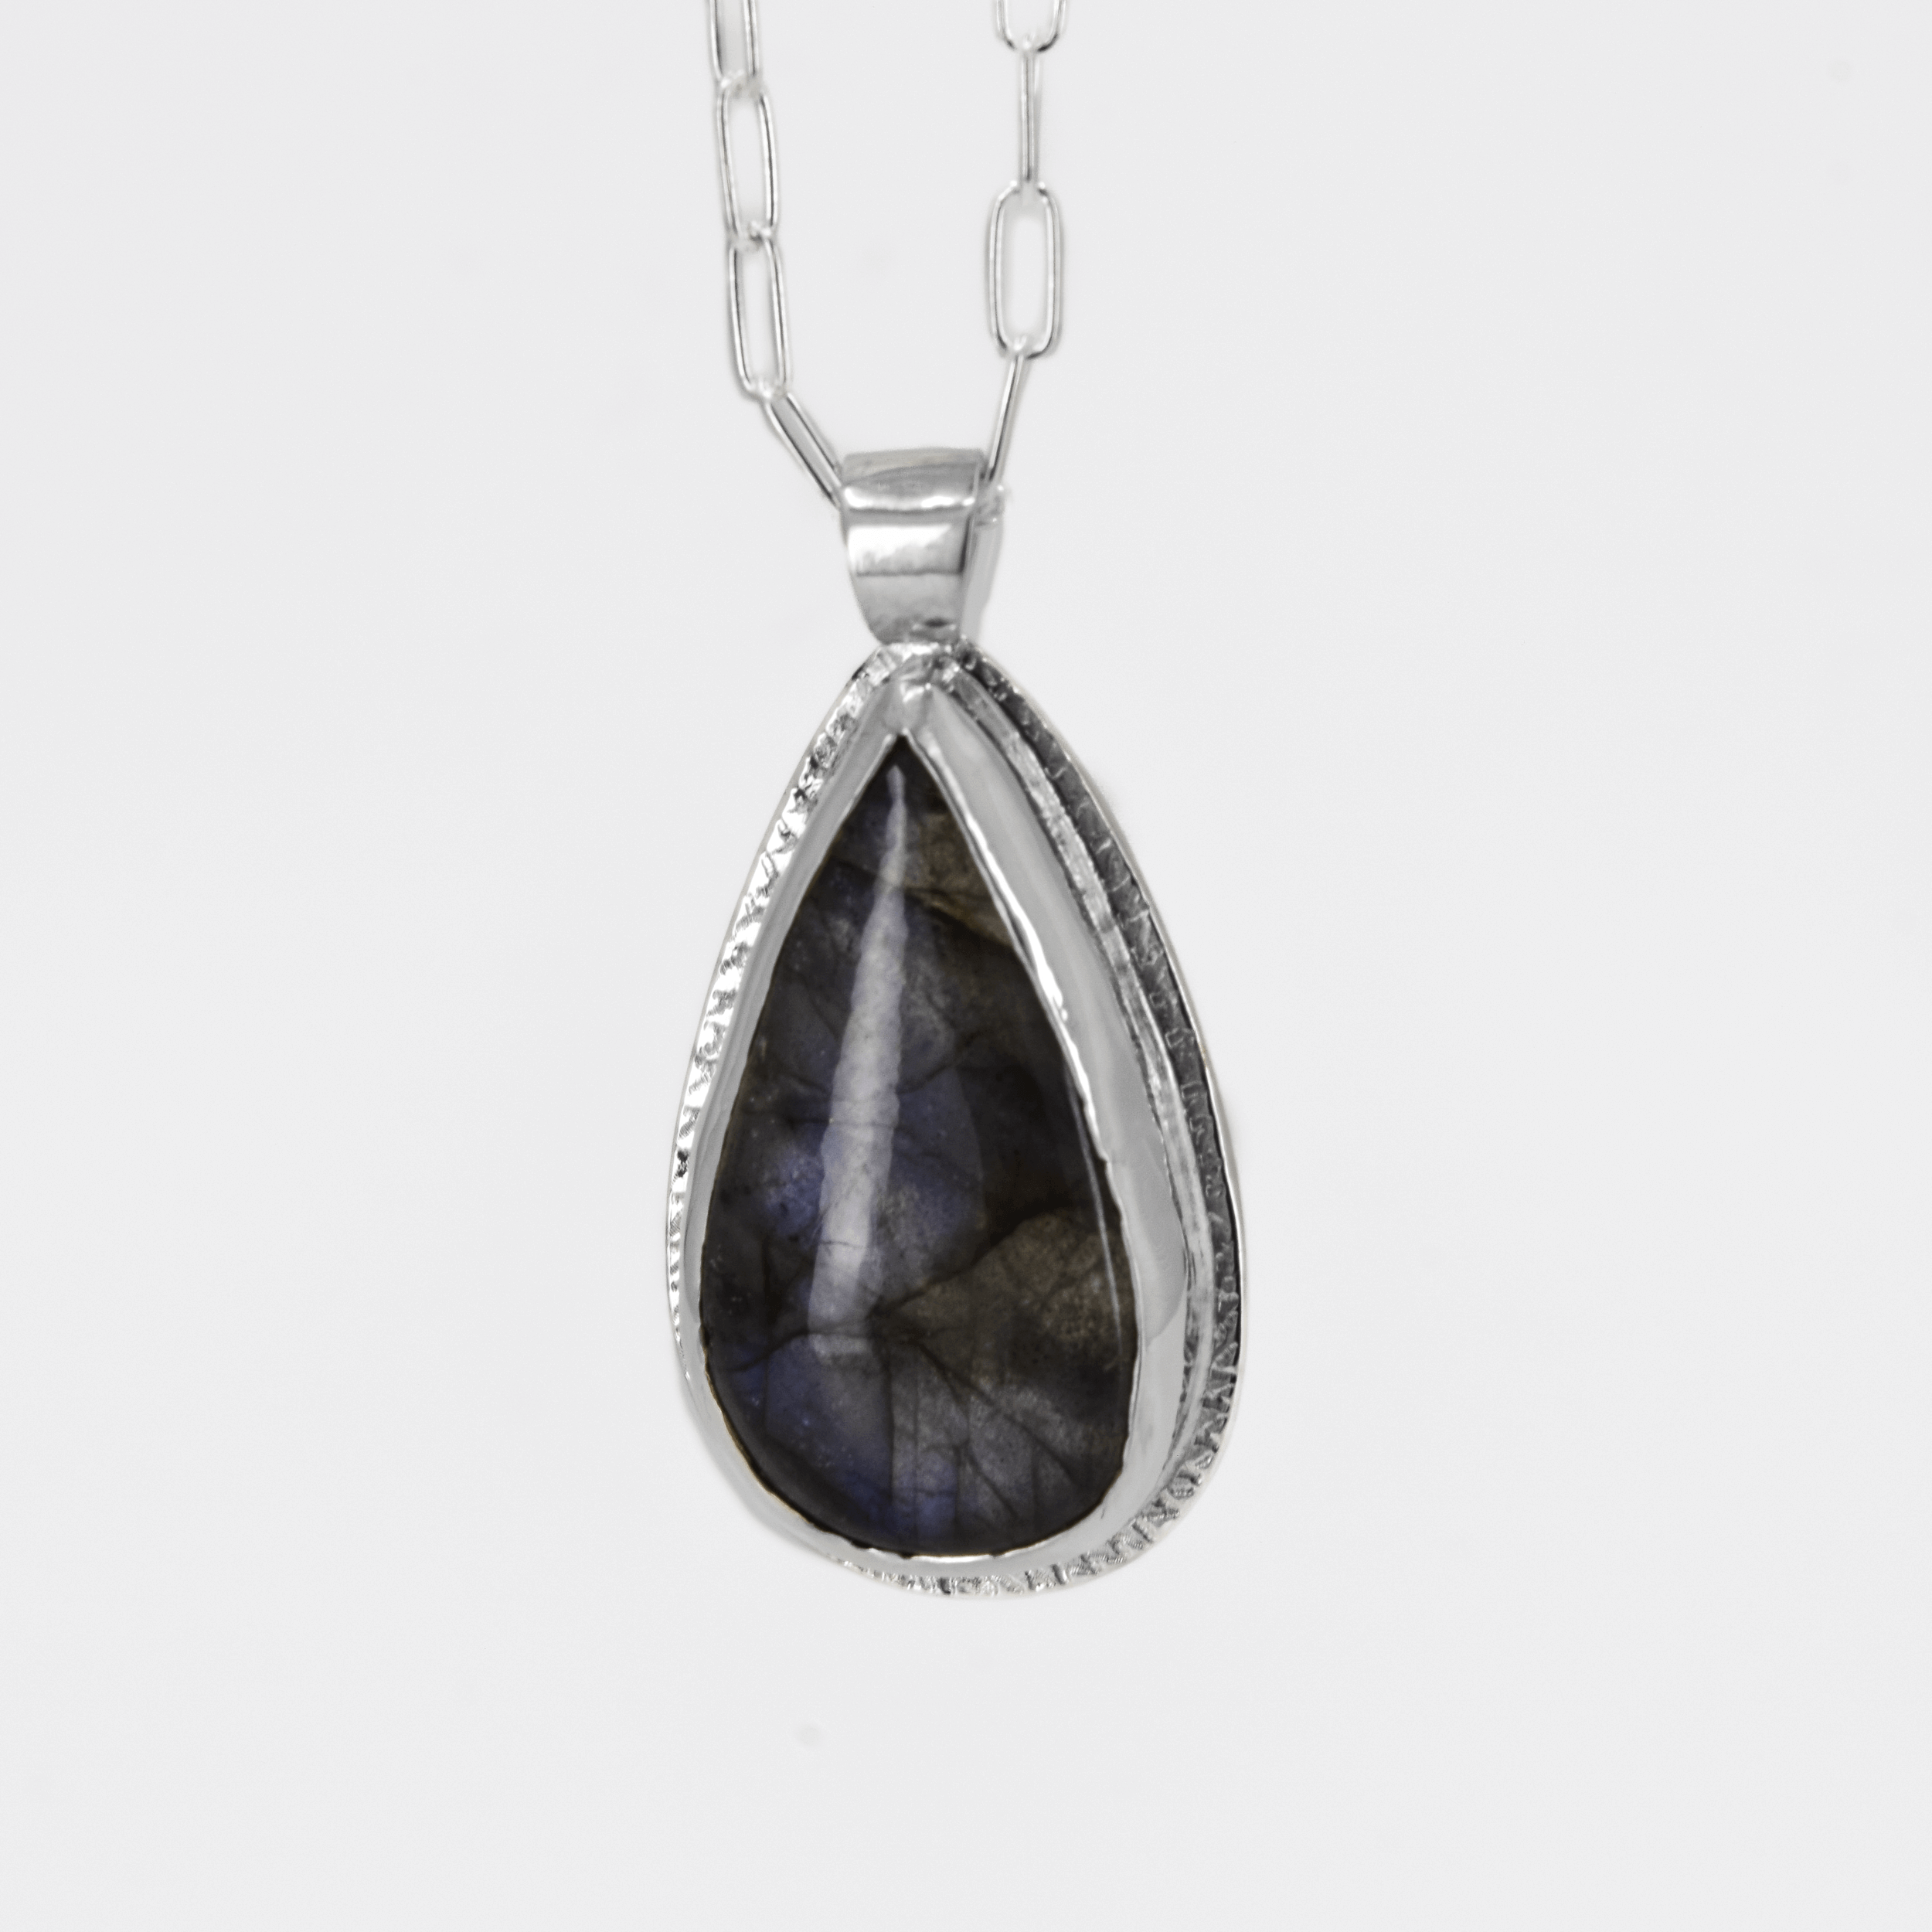 sterling silver pendant with a labradorite stone that has blue flashes hanging from a paperclip style chain